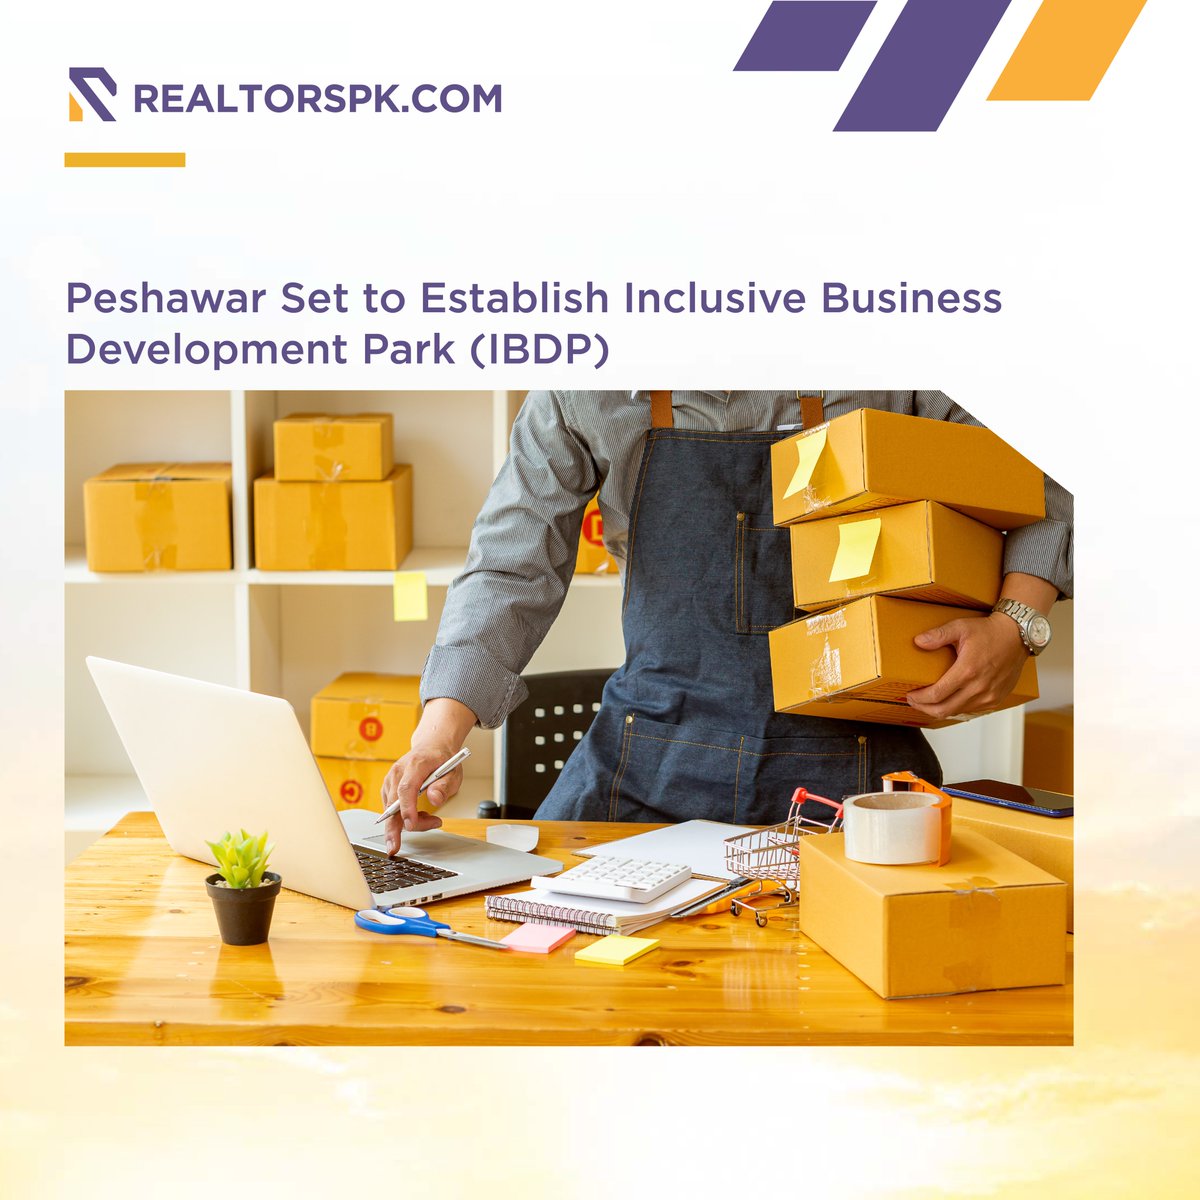 KPEZDMC have signed an MoU to set up Inclusive Business Development Park (#IBDP) in #Peshawar.

Read More Here: bit.ly/3qwOguG

#therealtorspk #realtorspk #news #BreakingNews  #kpk #businesspark #businessdevelopmentpark #investment #homebasedbusiness #opportunityforall